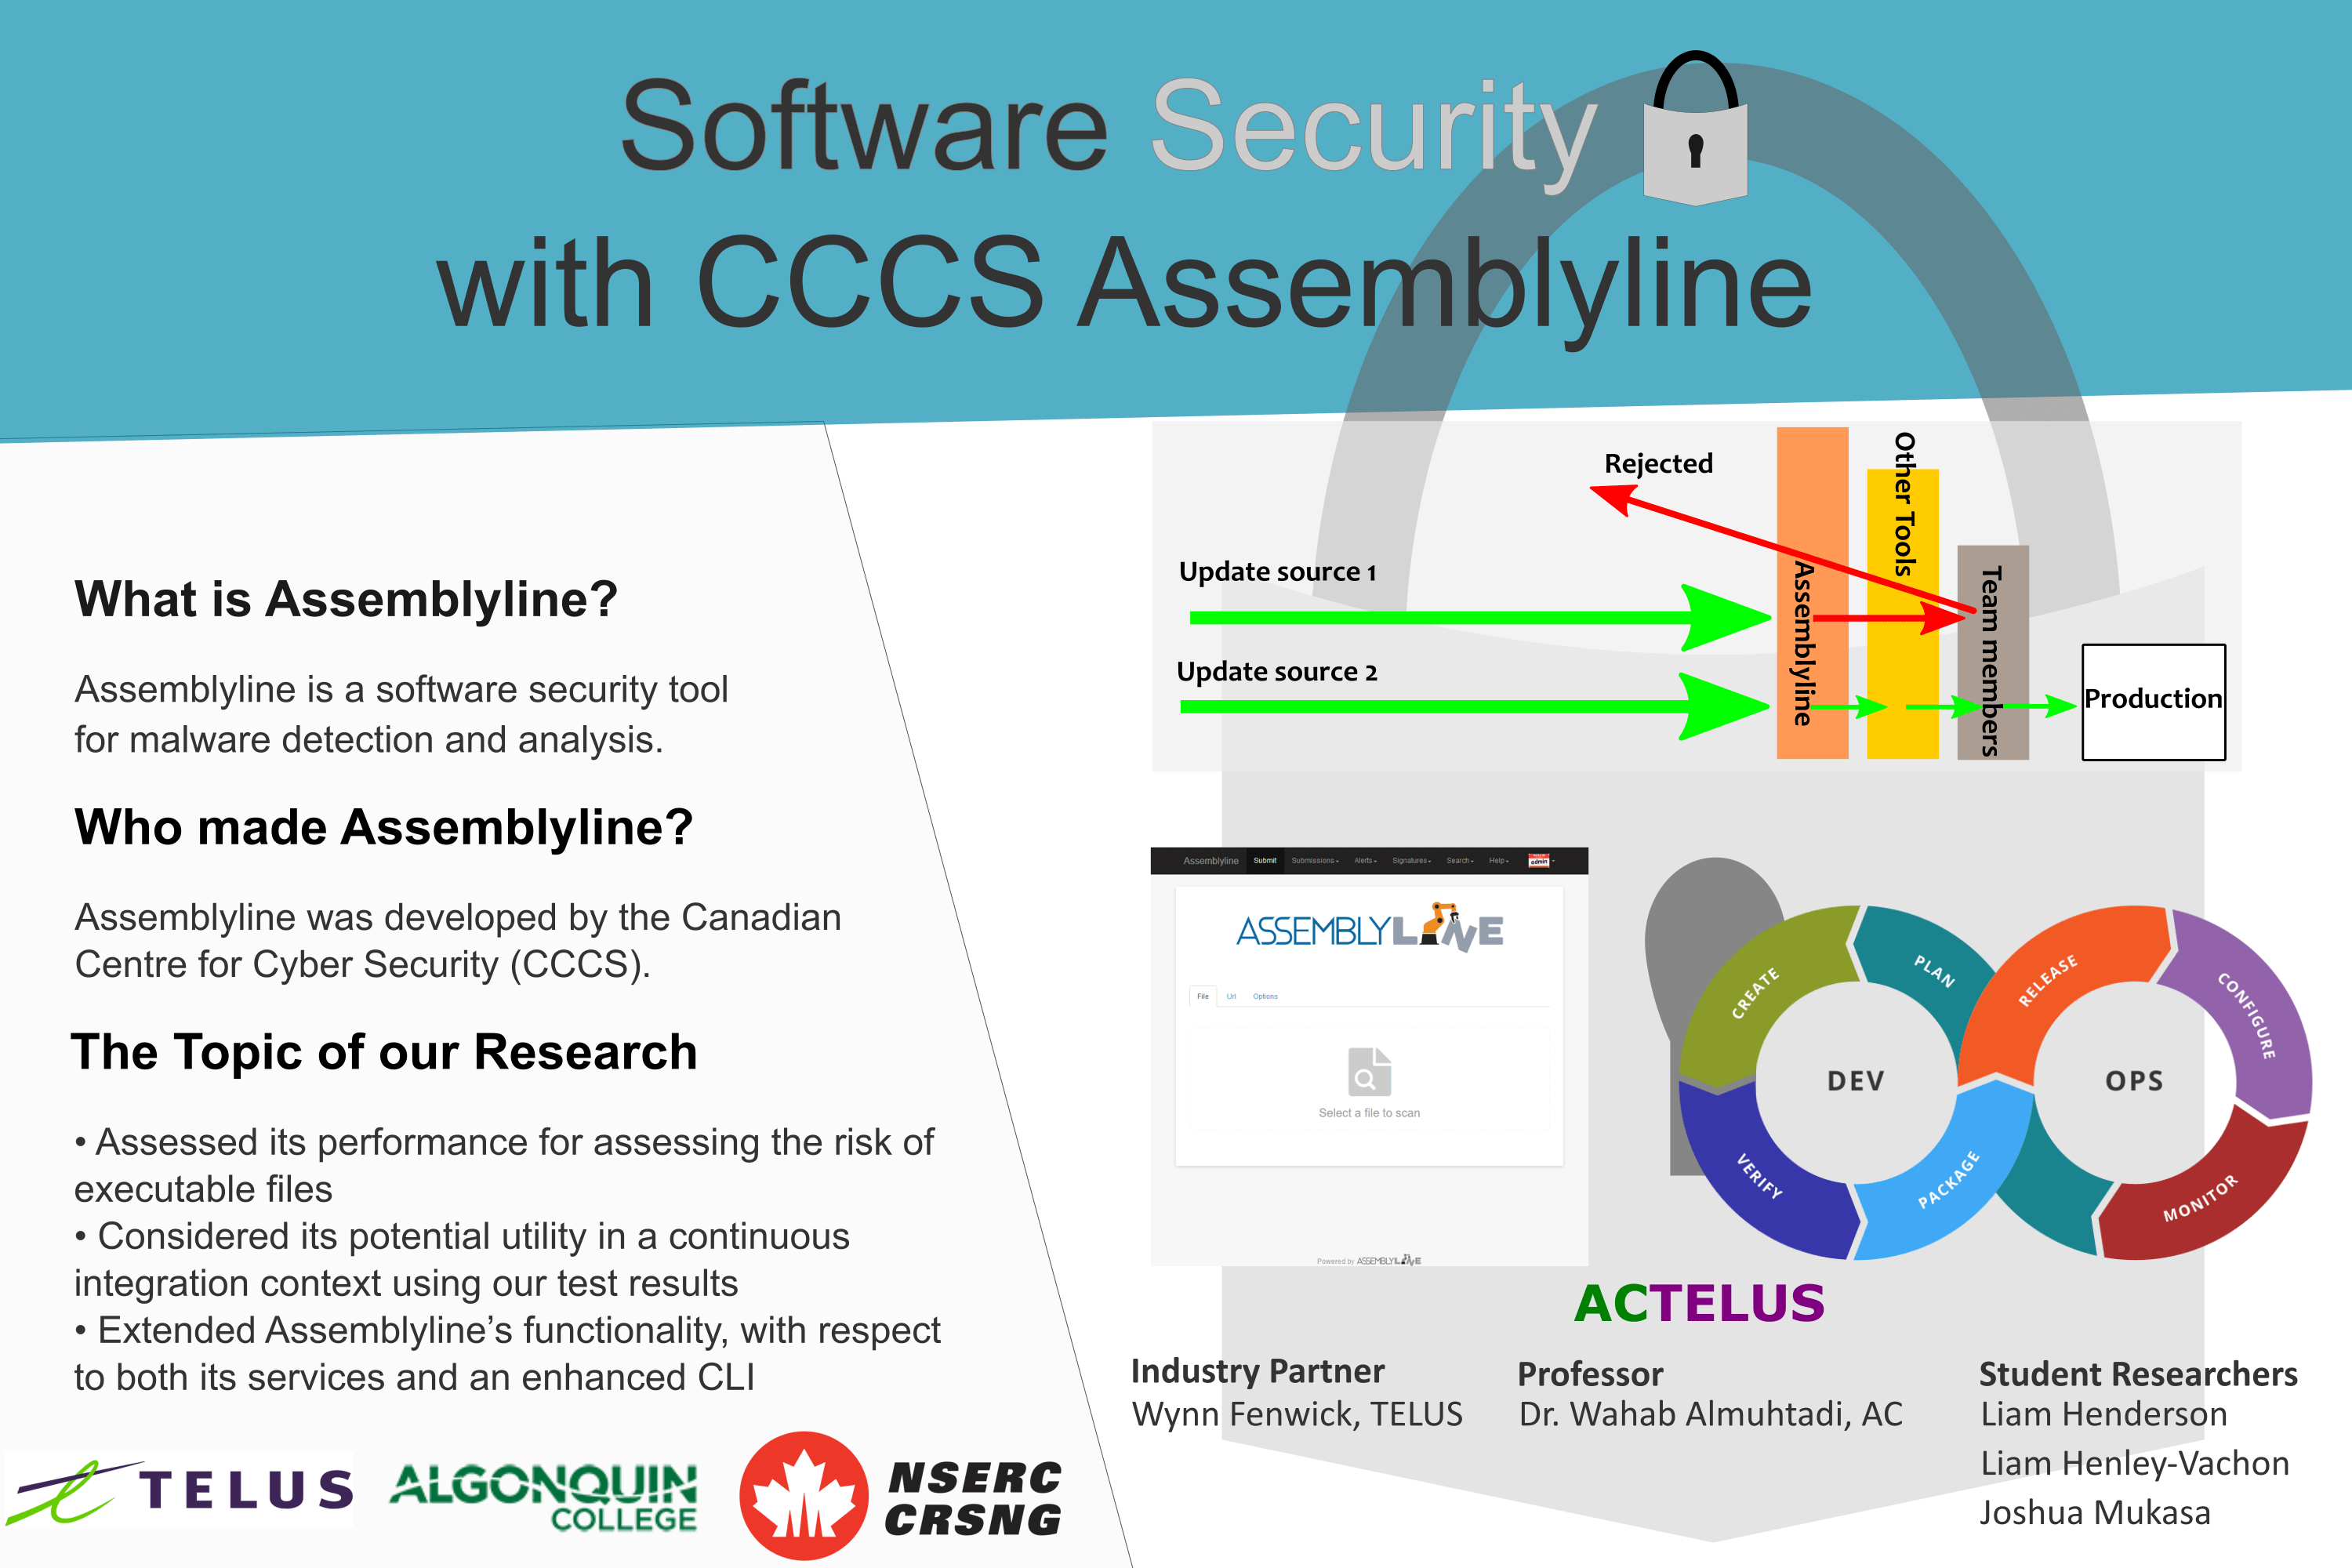 Software Security with CCCS Assemblyline